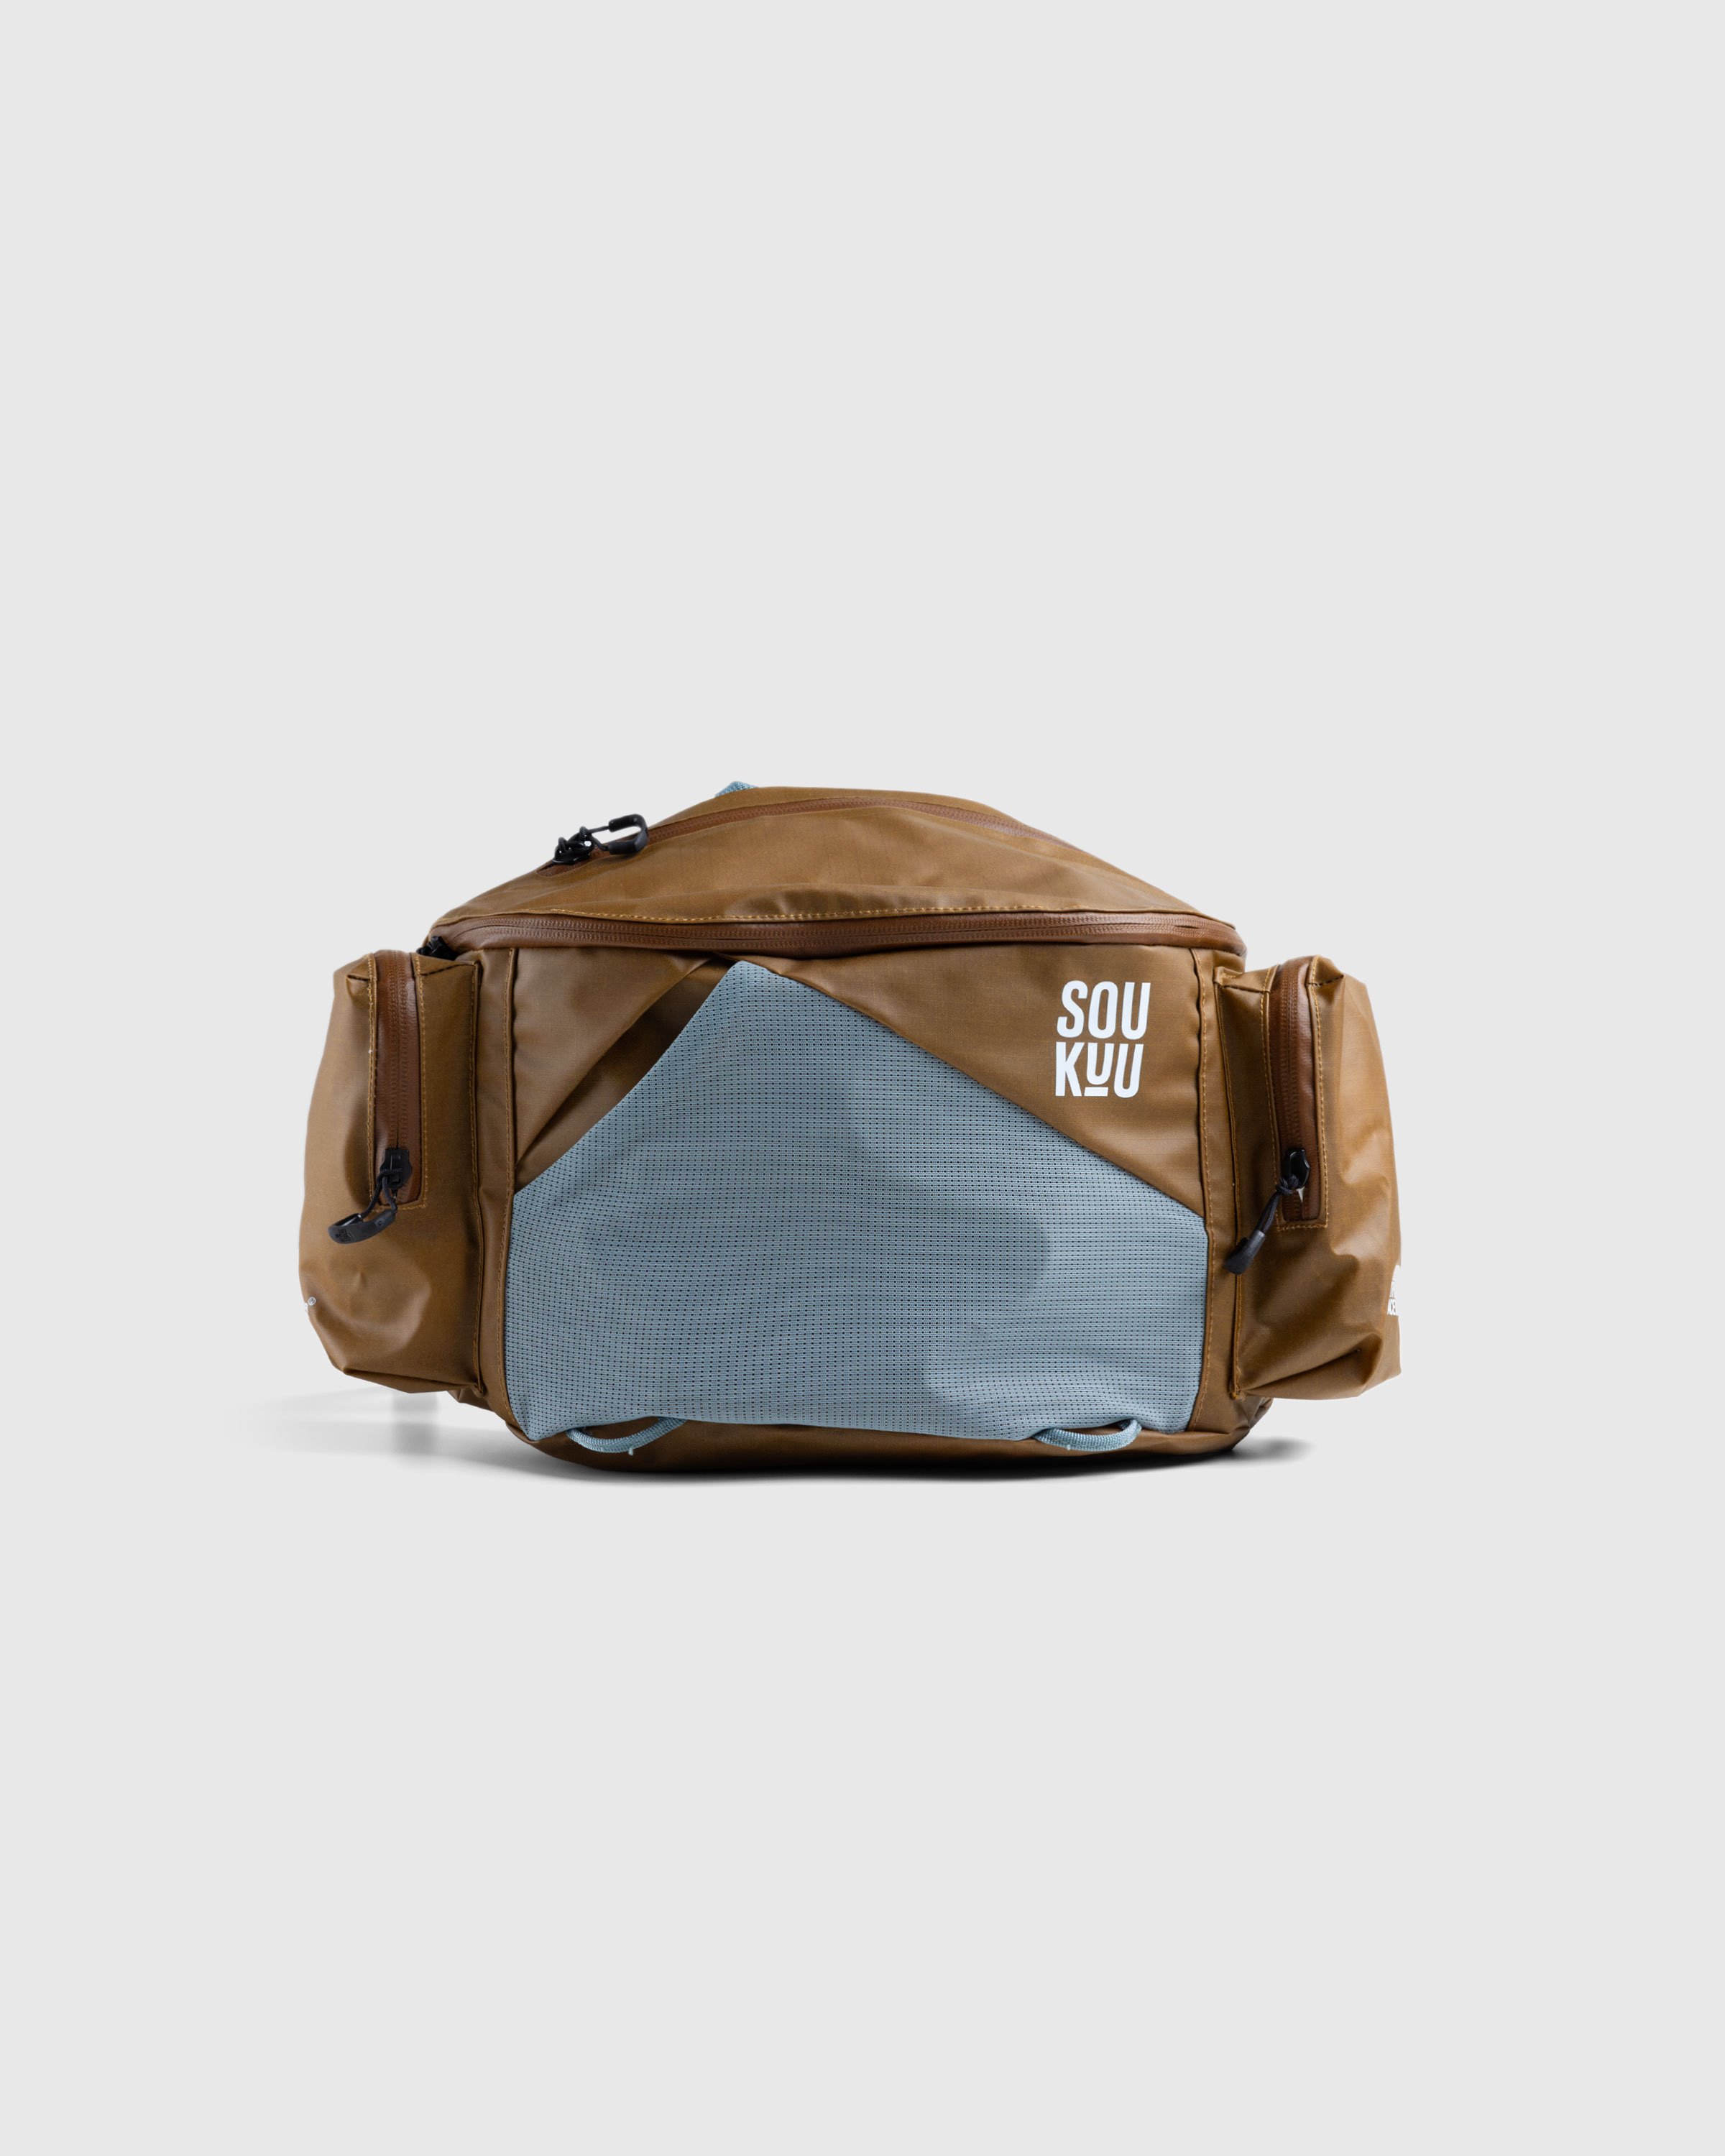 The North Face x UNDERCOVER - Soukuu Waistpack Bronze Brown/Concrete Gray - Accessories - Multi - Image 1